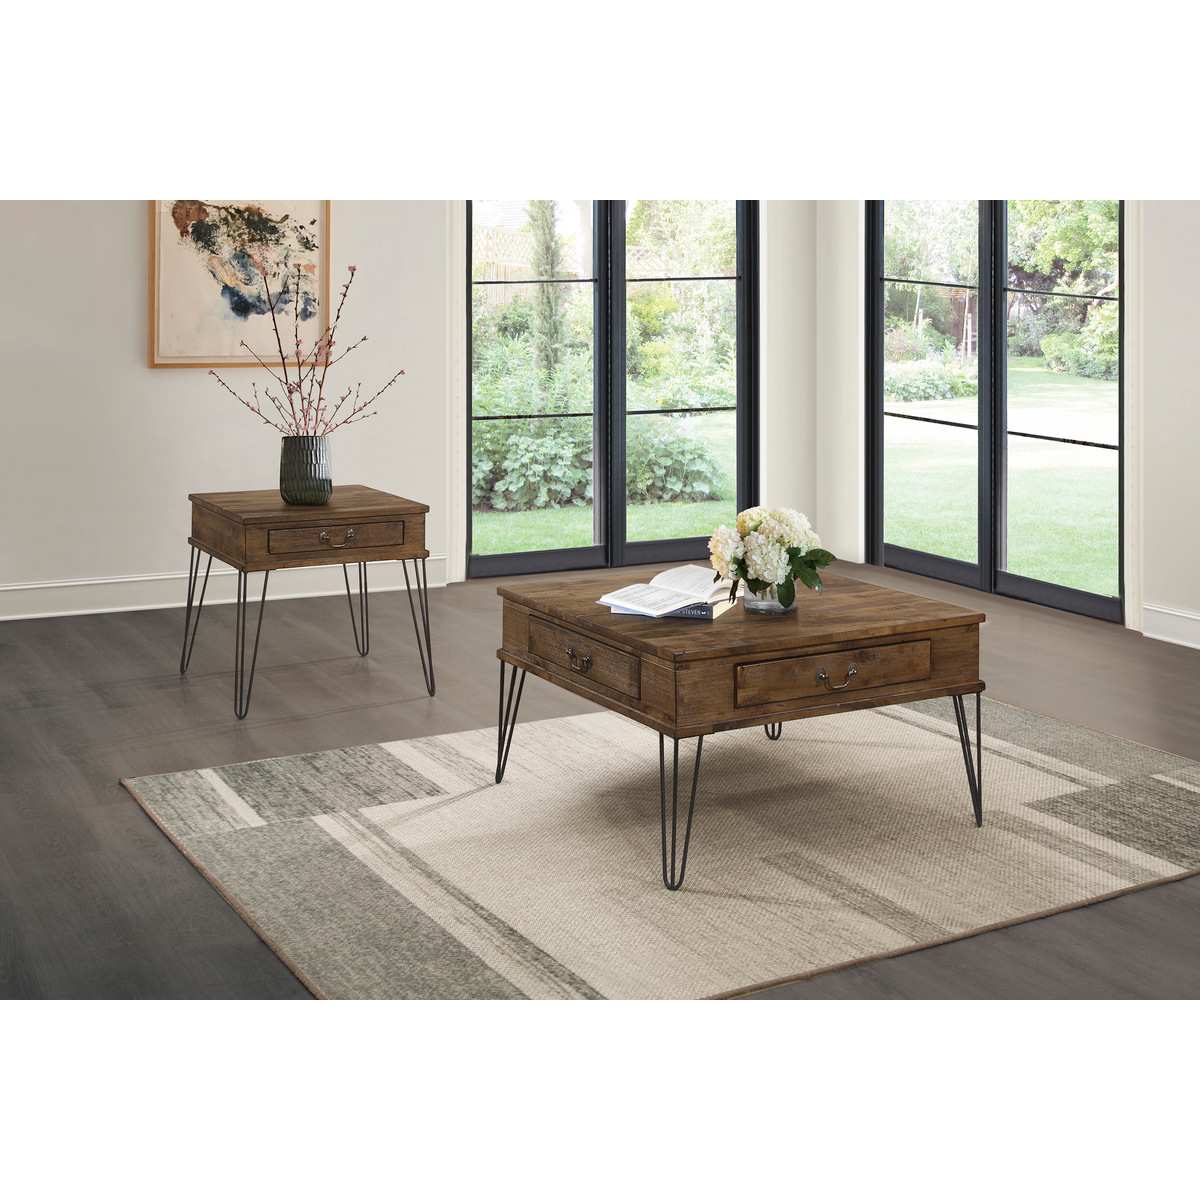 Shaffner Square Coffee Table Collection 3670M